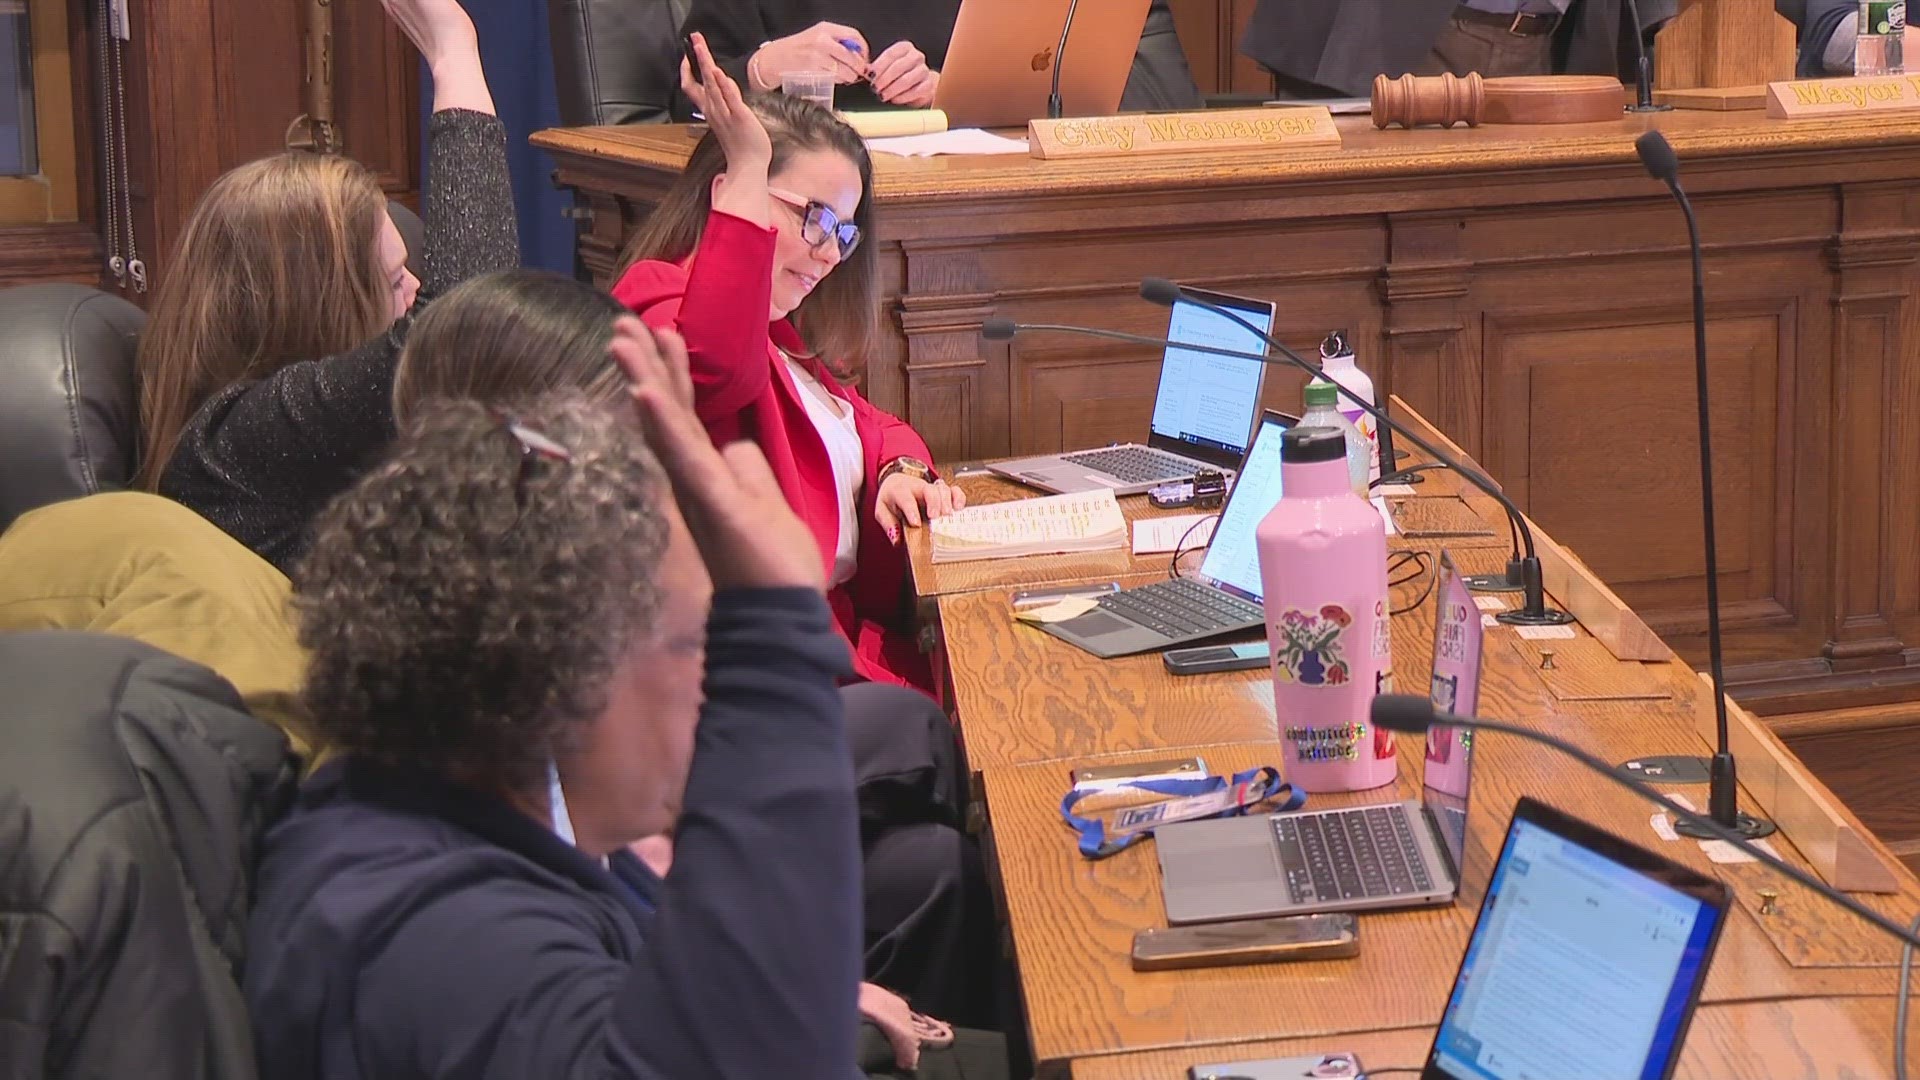 The city council also approved extending the homeless shelter bed capacity increase along with accepting MaineHousing funding for asylum seekers.